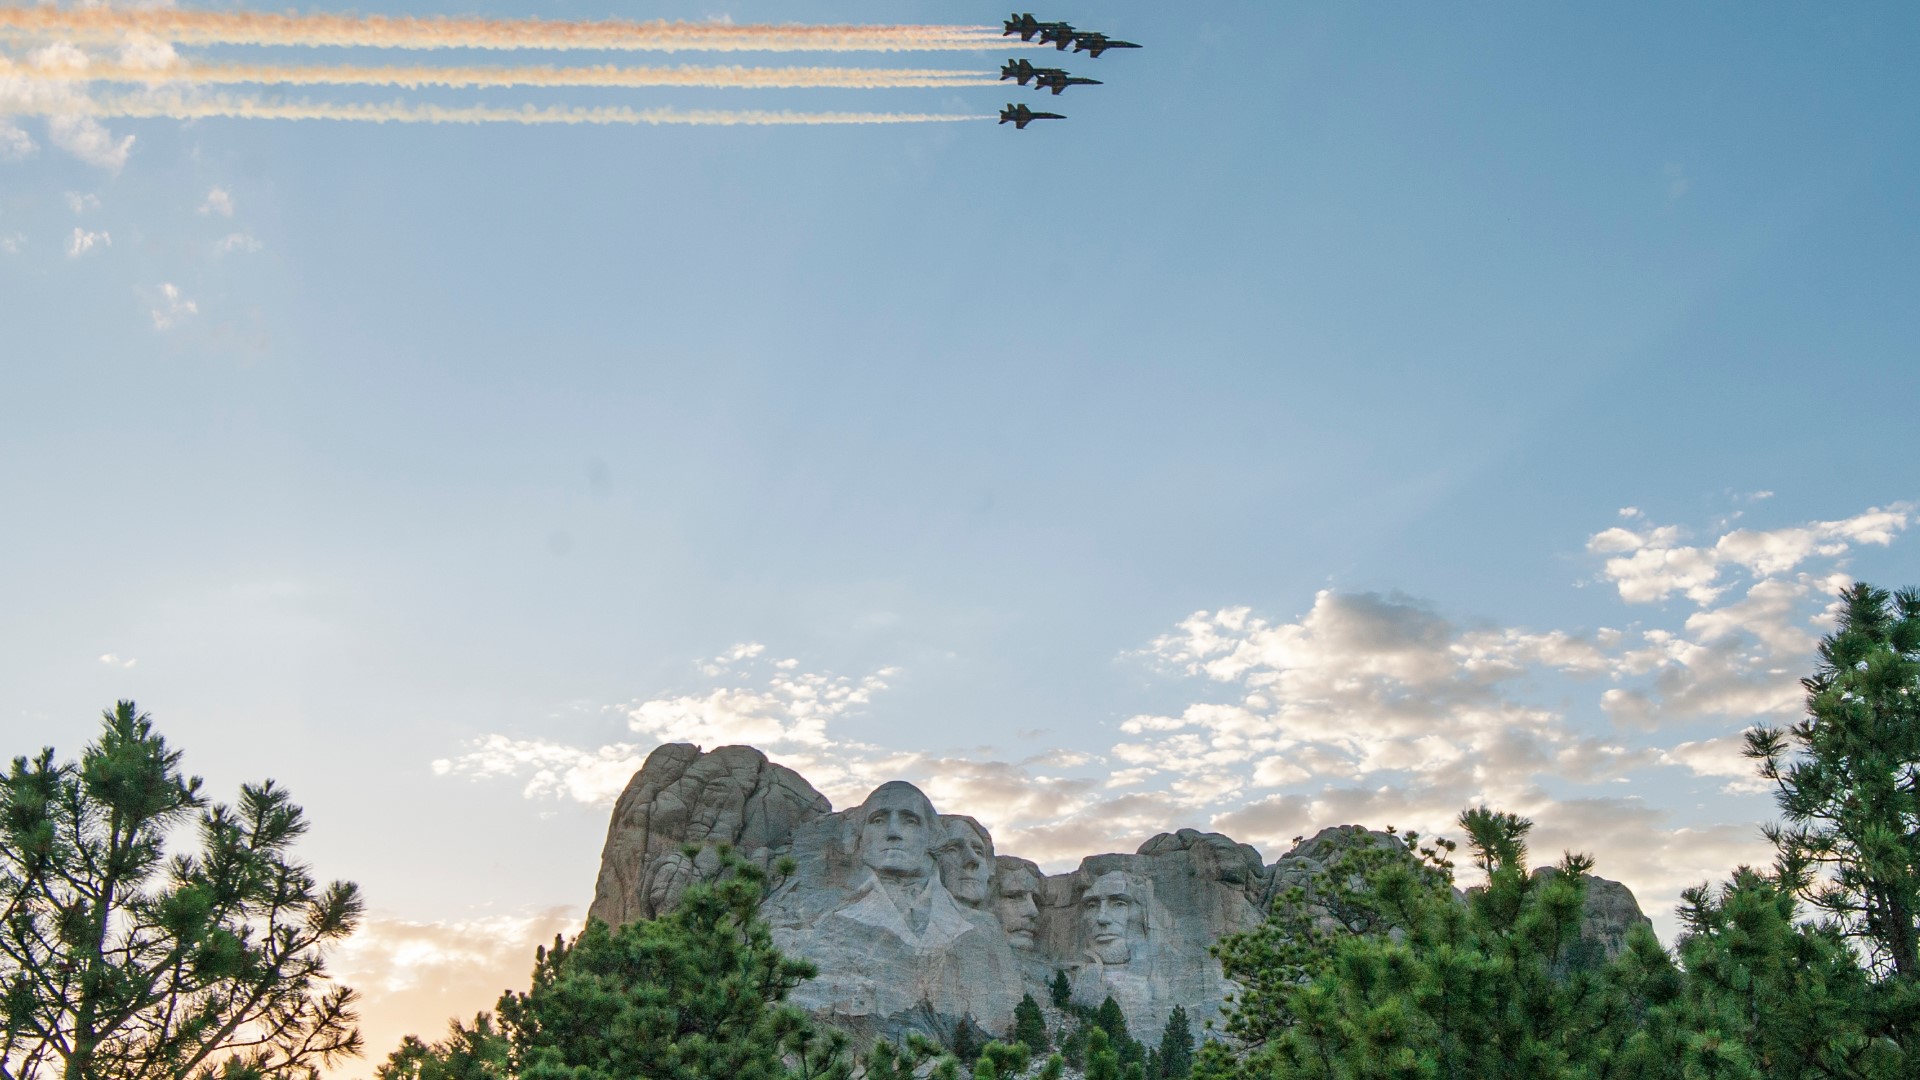 Blue Angels F-18 Hornets fly over Mount Rushmore during a Salute to America celebration hosted by officials in South Dakota on July 3, 2020.